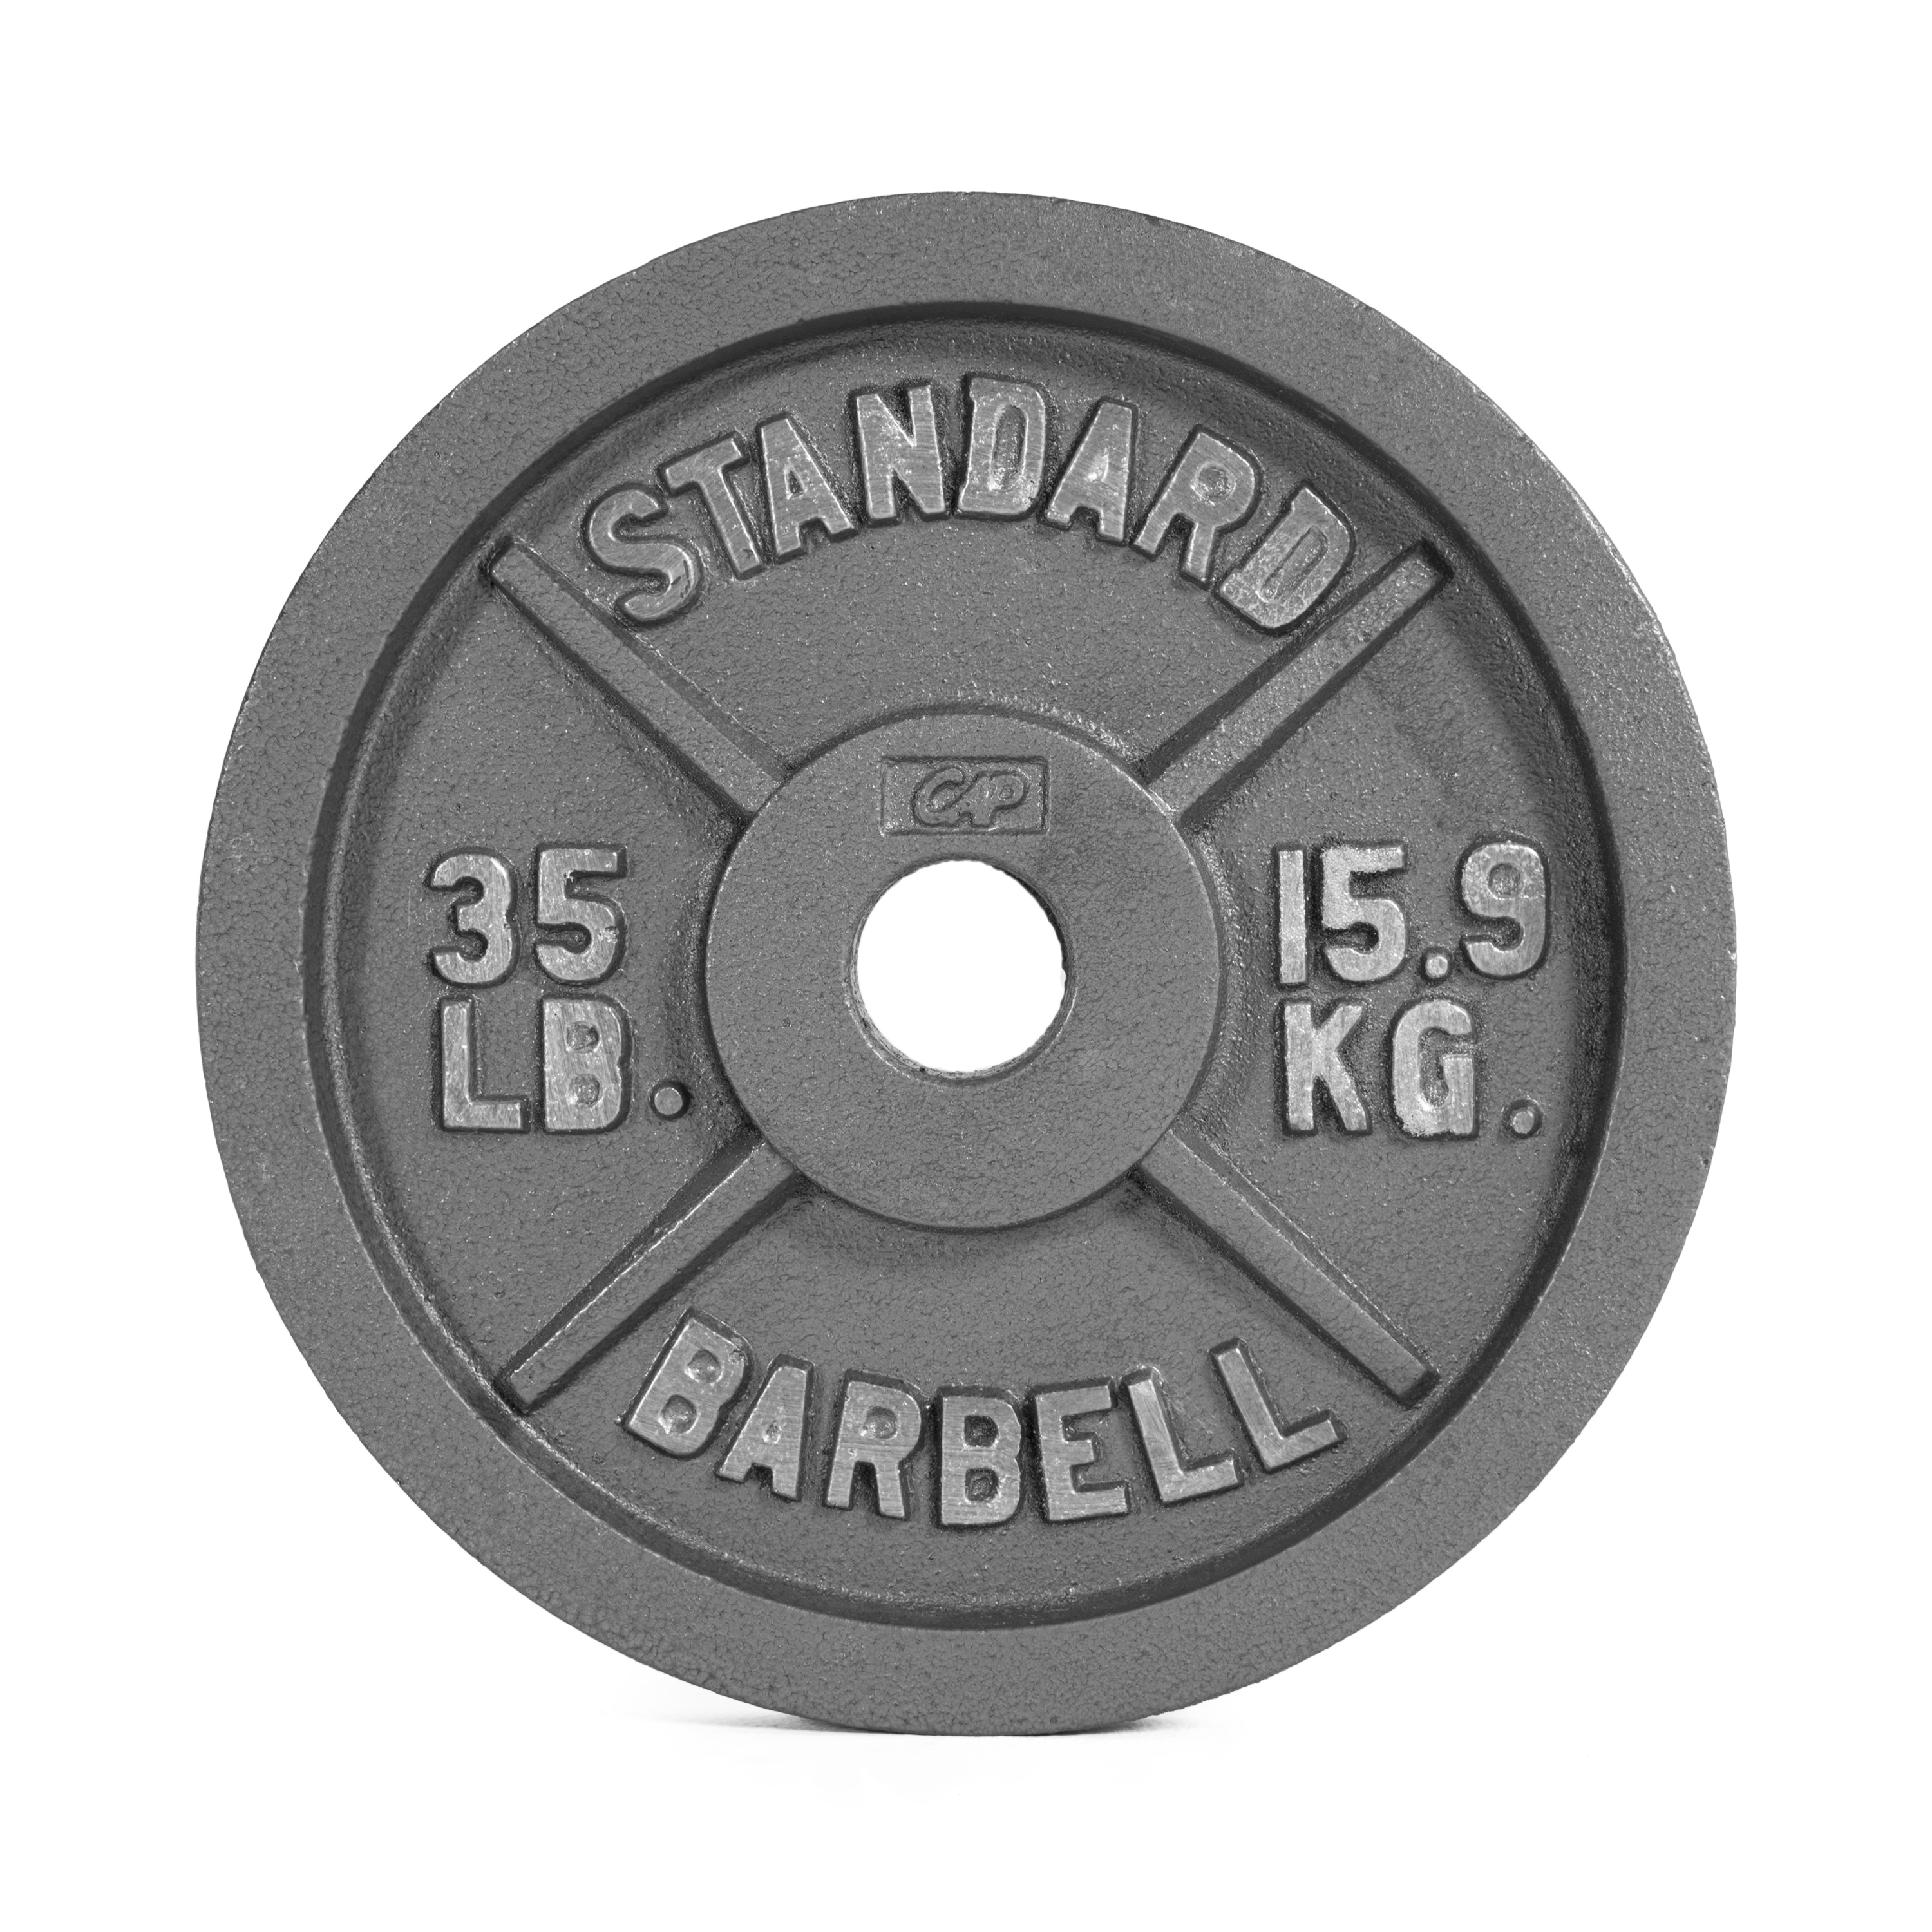 CAP Barbell Gray Olympic Cast Iron Weight Plate, 35 lb - image 1 of 2